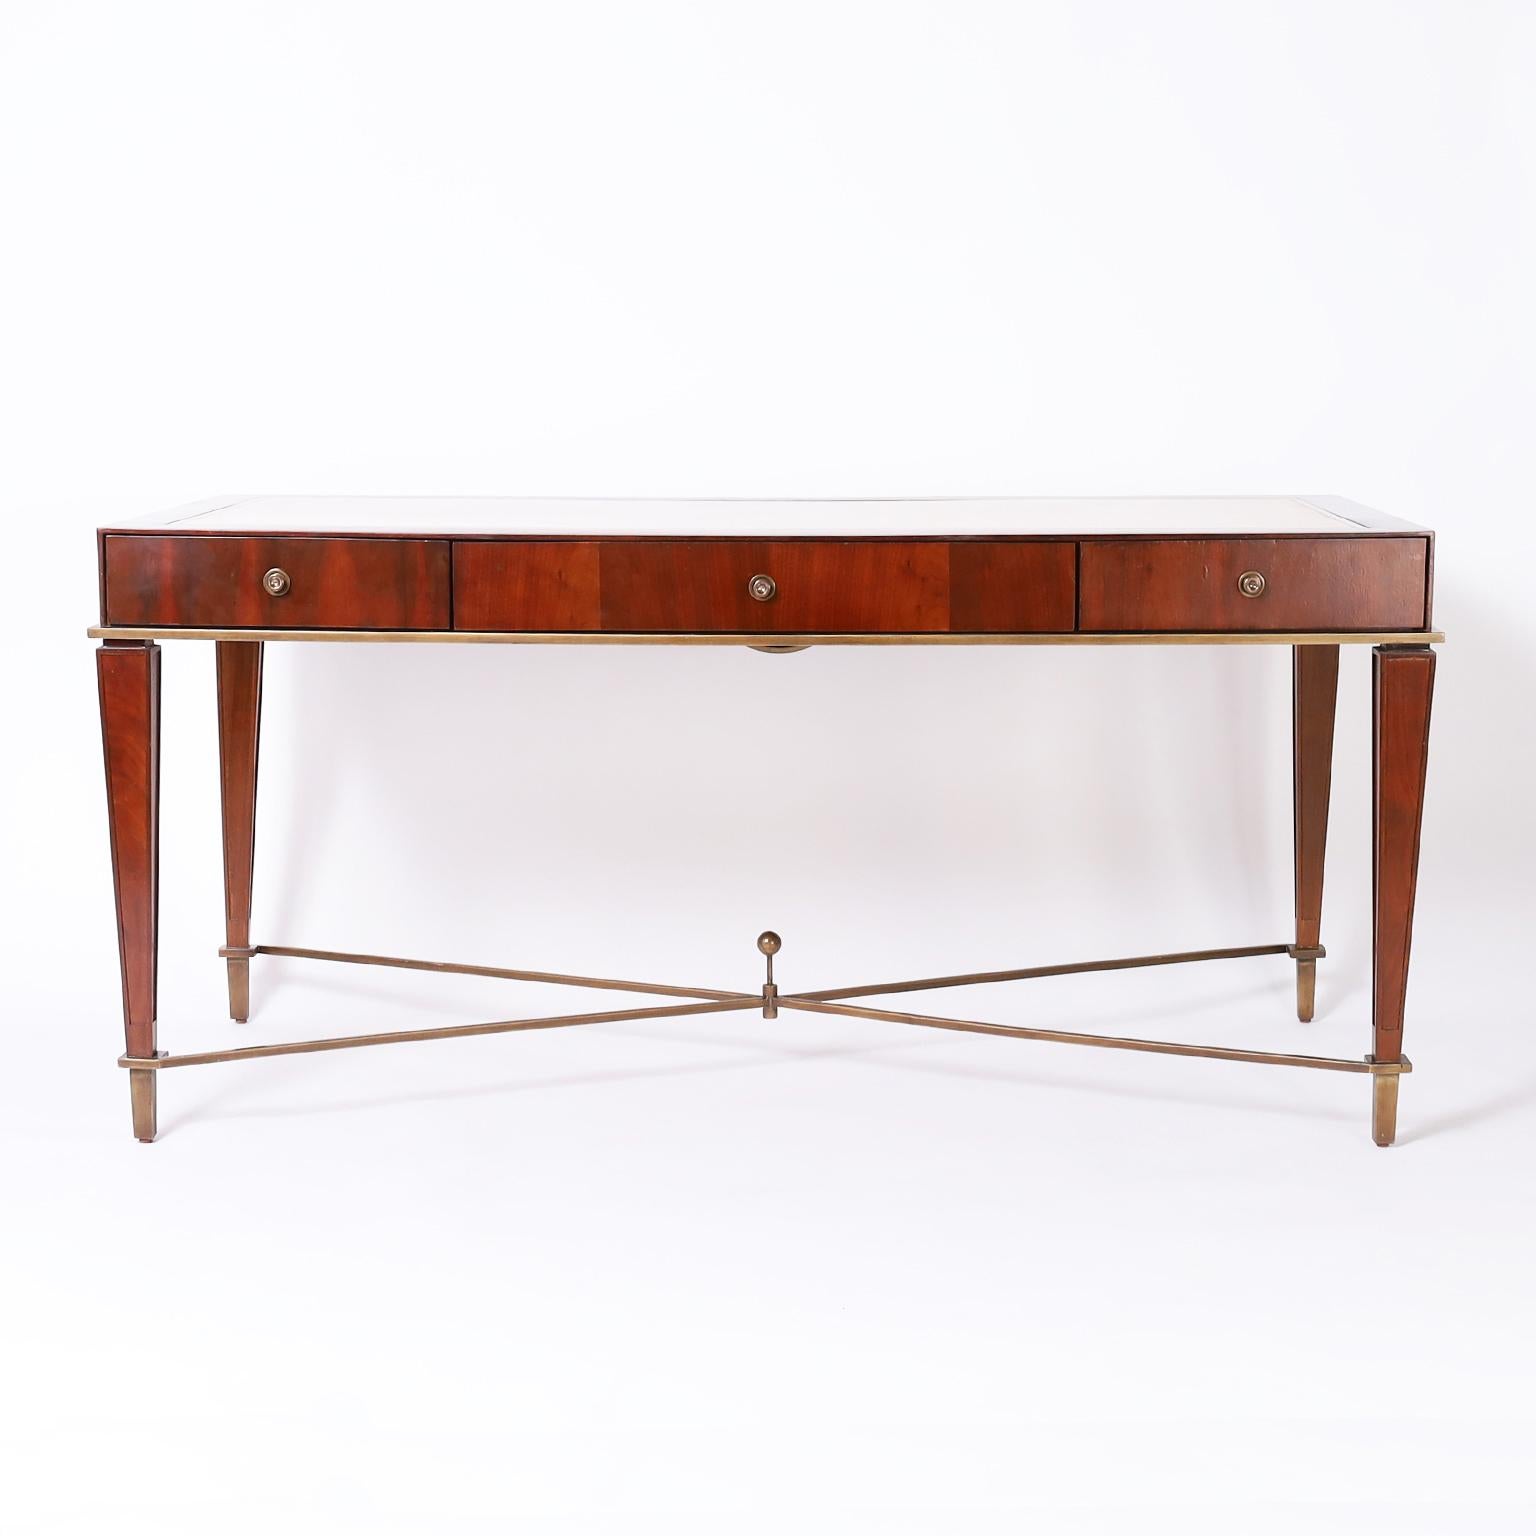 American Art Deco Style Leather Top Desk For Sale